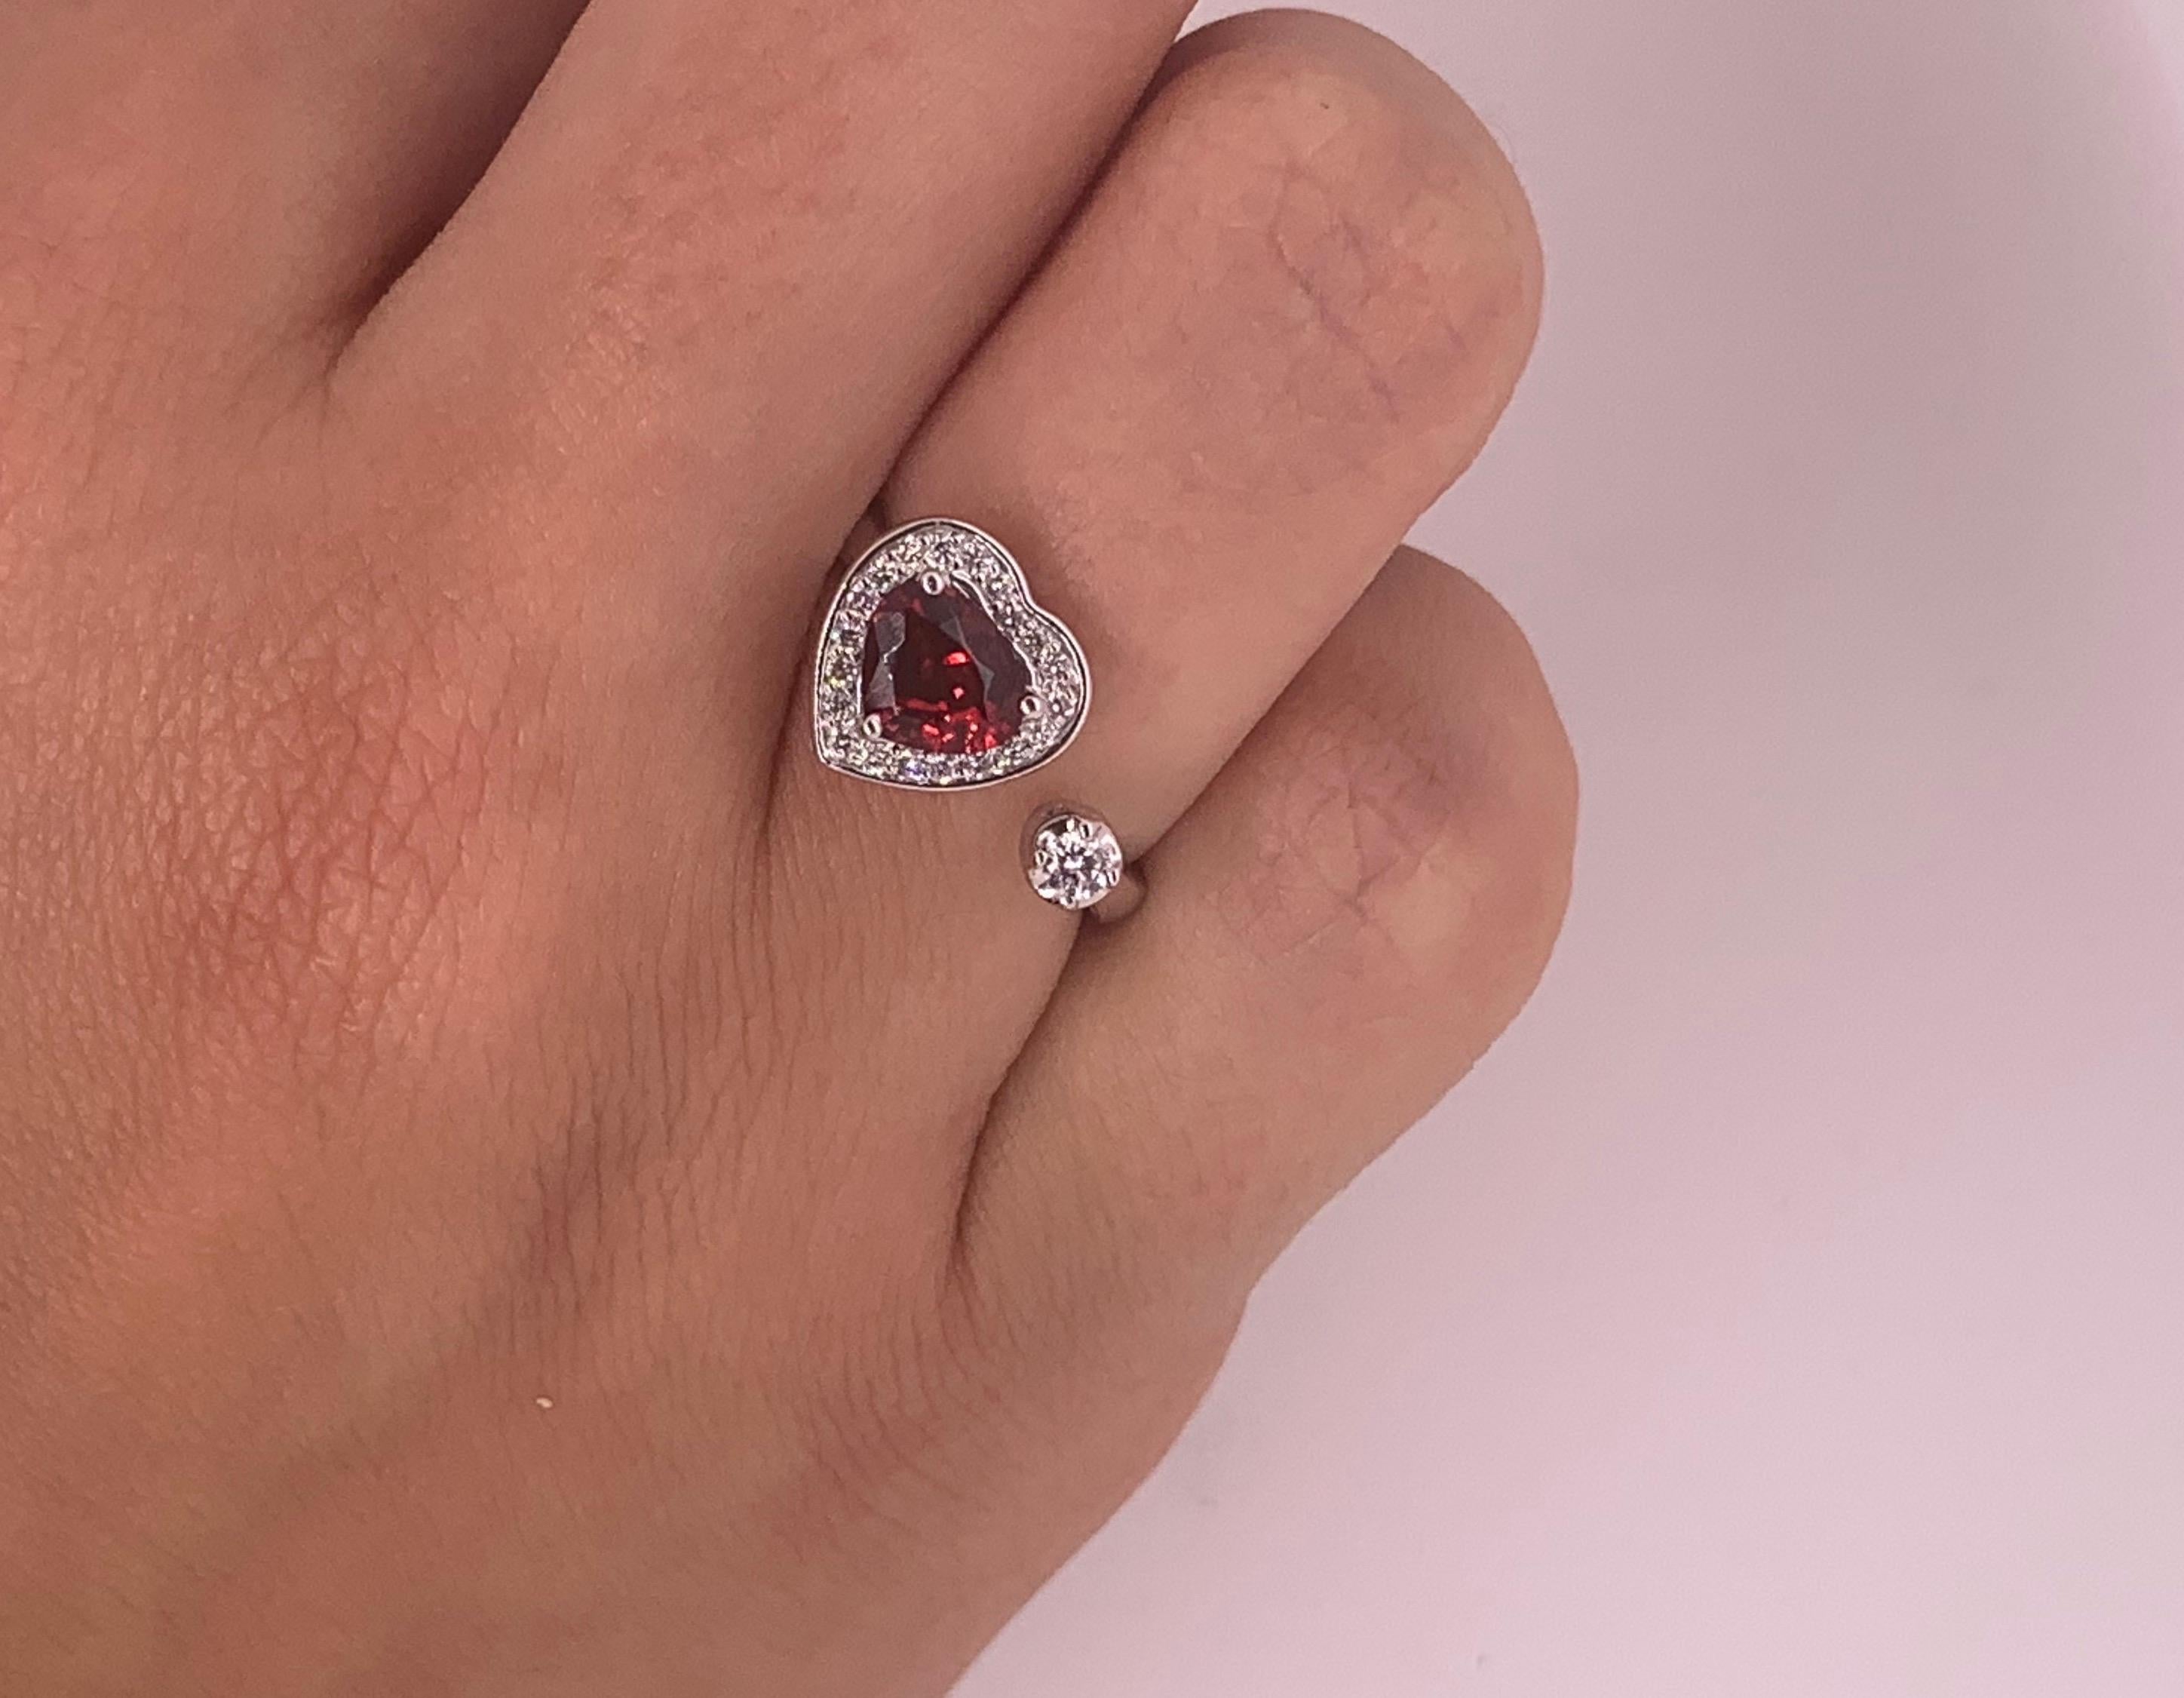 Material: 14K White Gold
Gemstone Details: 1 Pear Shaped Spinel at 0.94 Carats - Measuring 5.6 x 6.5 mm
Diamond Details: 20 Brilliant Round White Diamonds at 0.13 Carats. SI Clarity / H-I Color. 
Diamond Details: 1 Brilliant Round White Diamond at